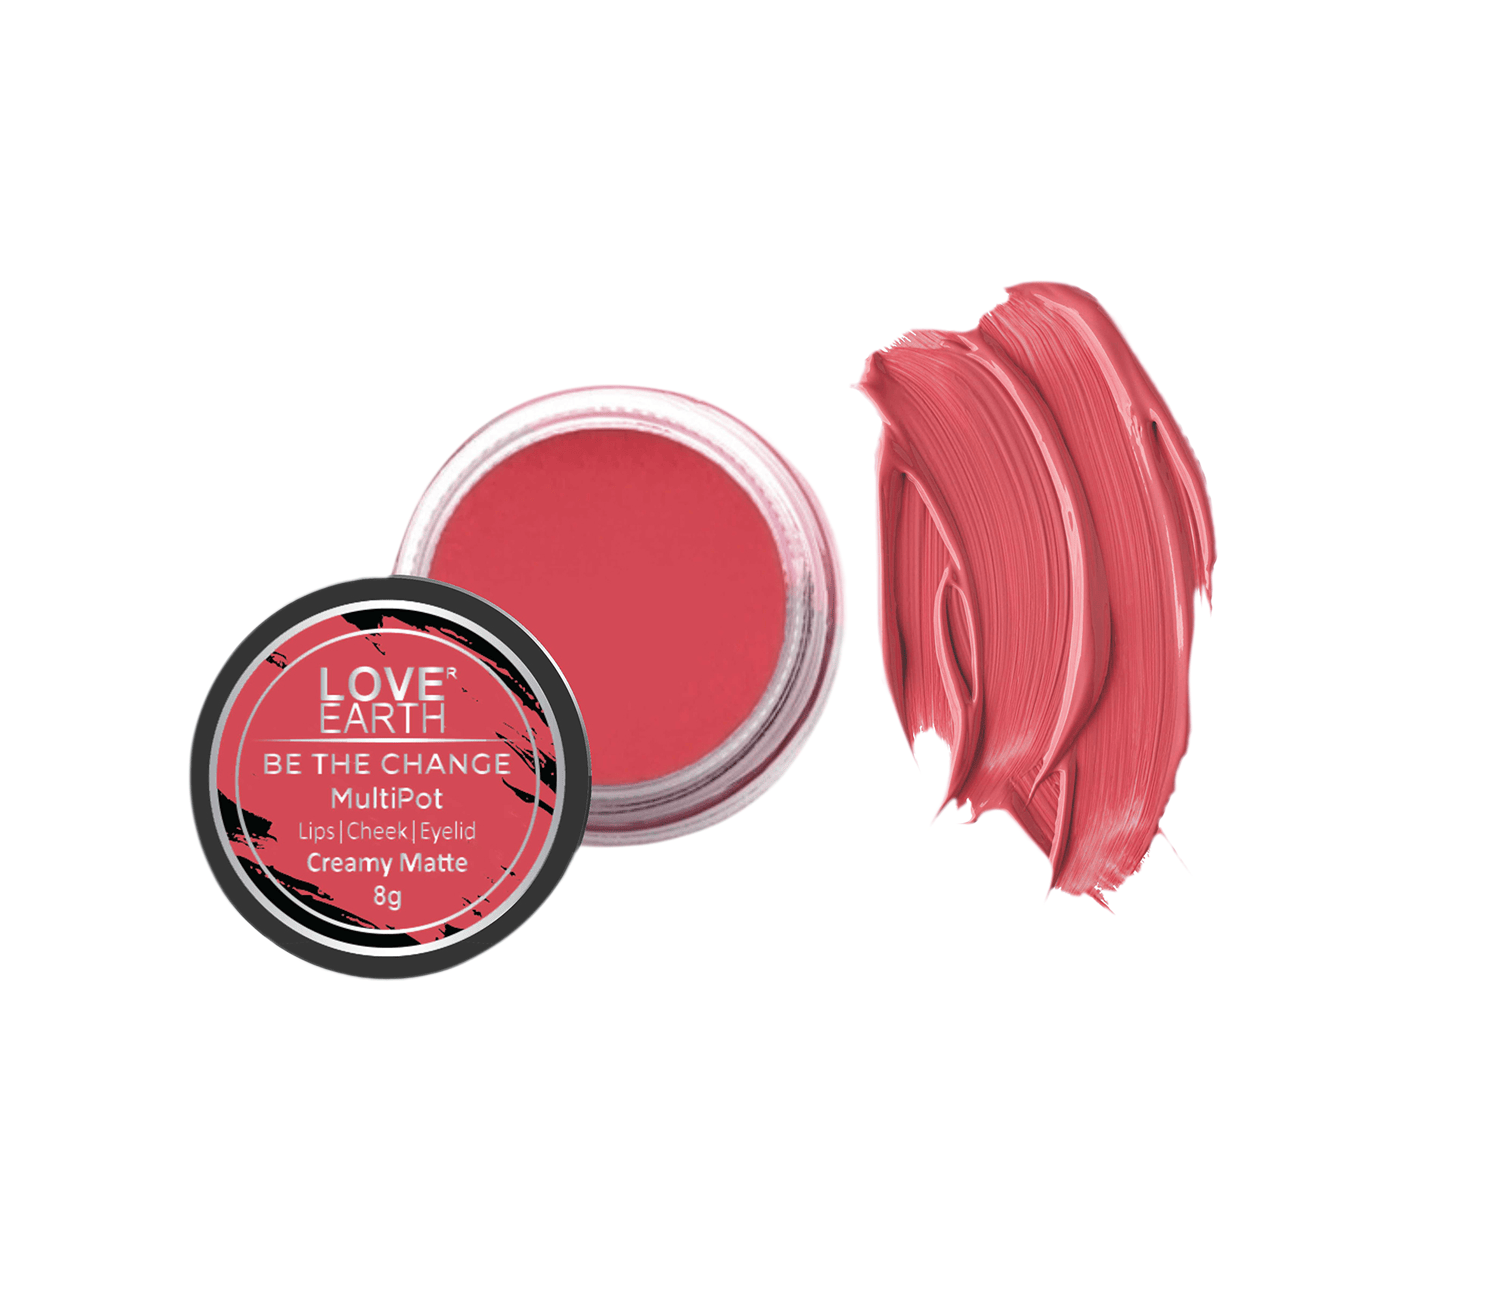 LOVE EARTH | Love Earth Lip Tint & Cheek Tint Multipot-Be The Change With Richness Of Jojoba Oil And Vitamin E For Lips, Eyelids & Cheeks, Matte Finish - Rose Pink 0